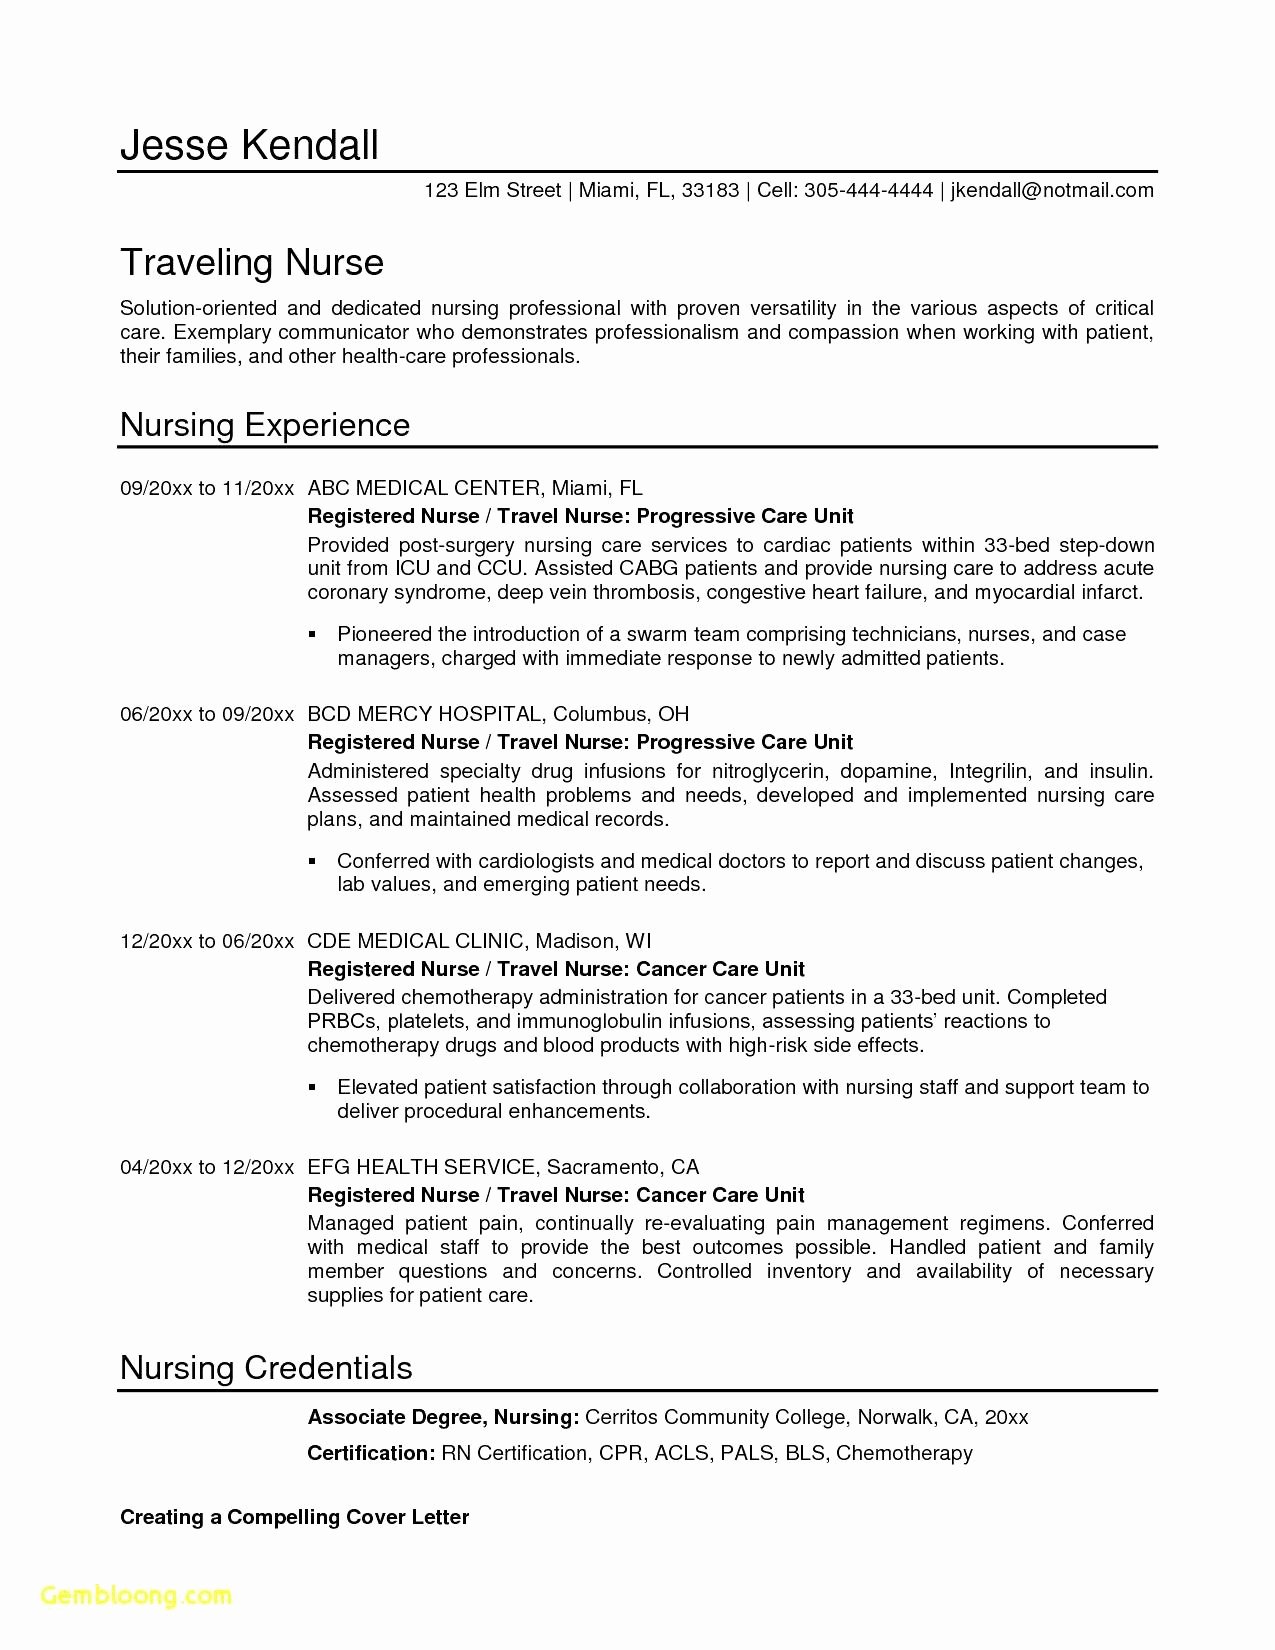 Free Resume Builder and Download Resume Ideas